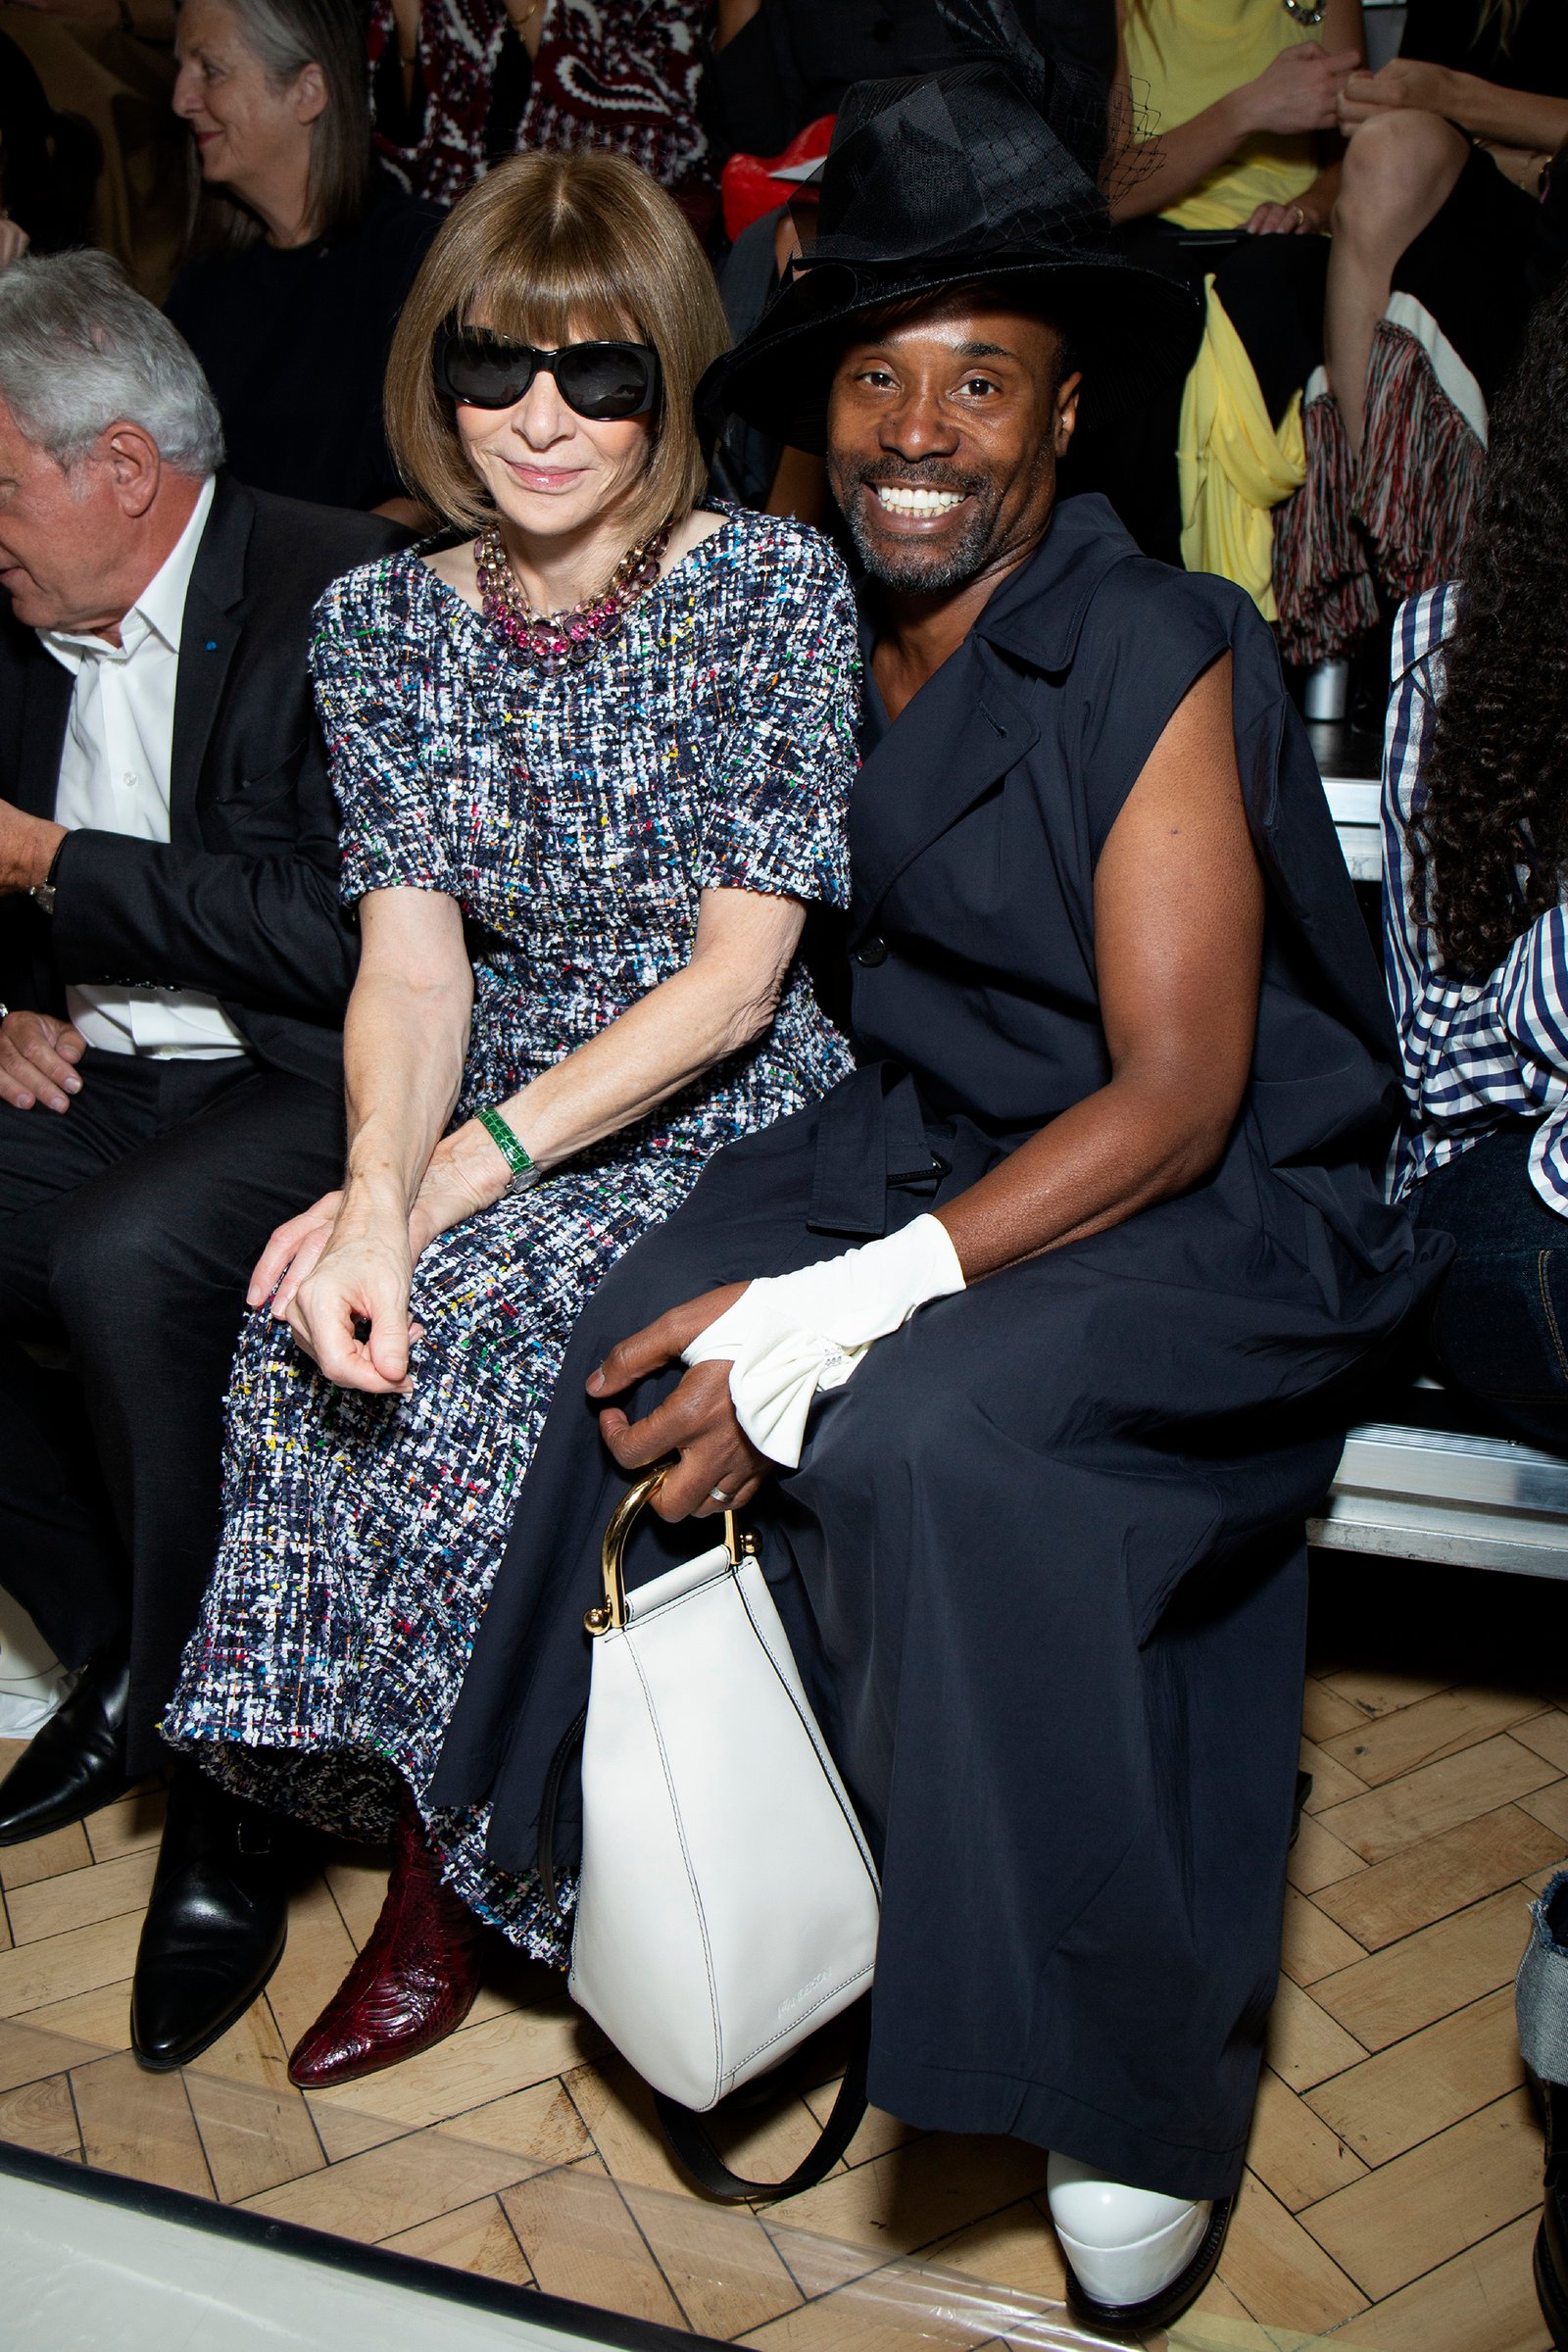 Anna Wintour and Billy Porter at a fashion show in 2020.